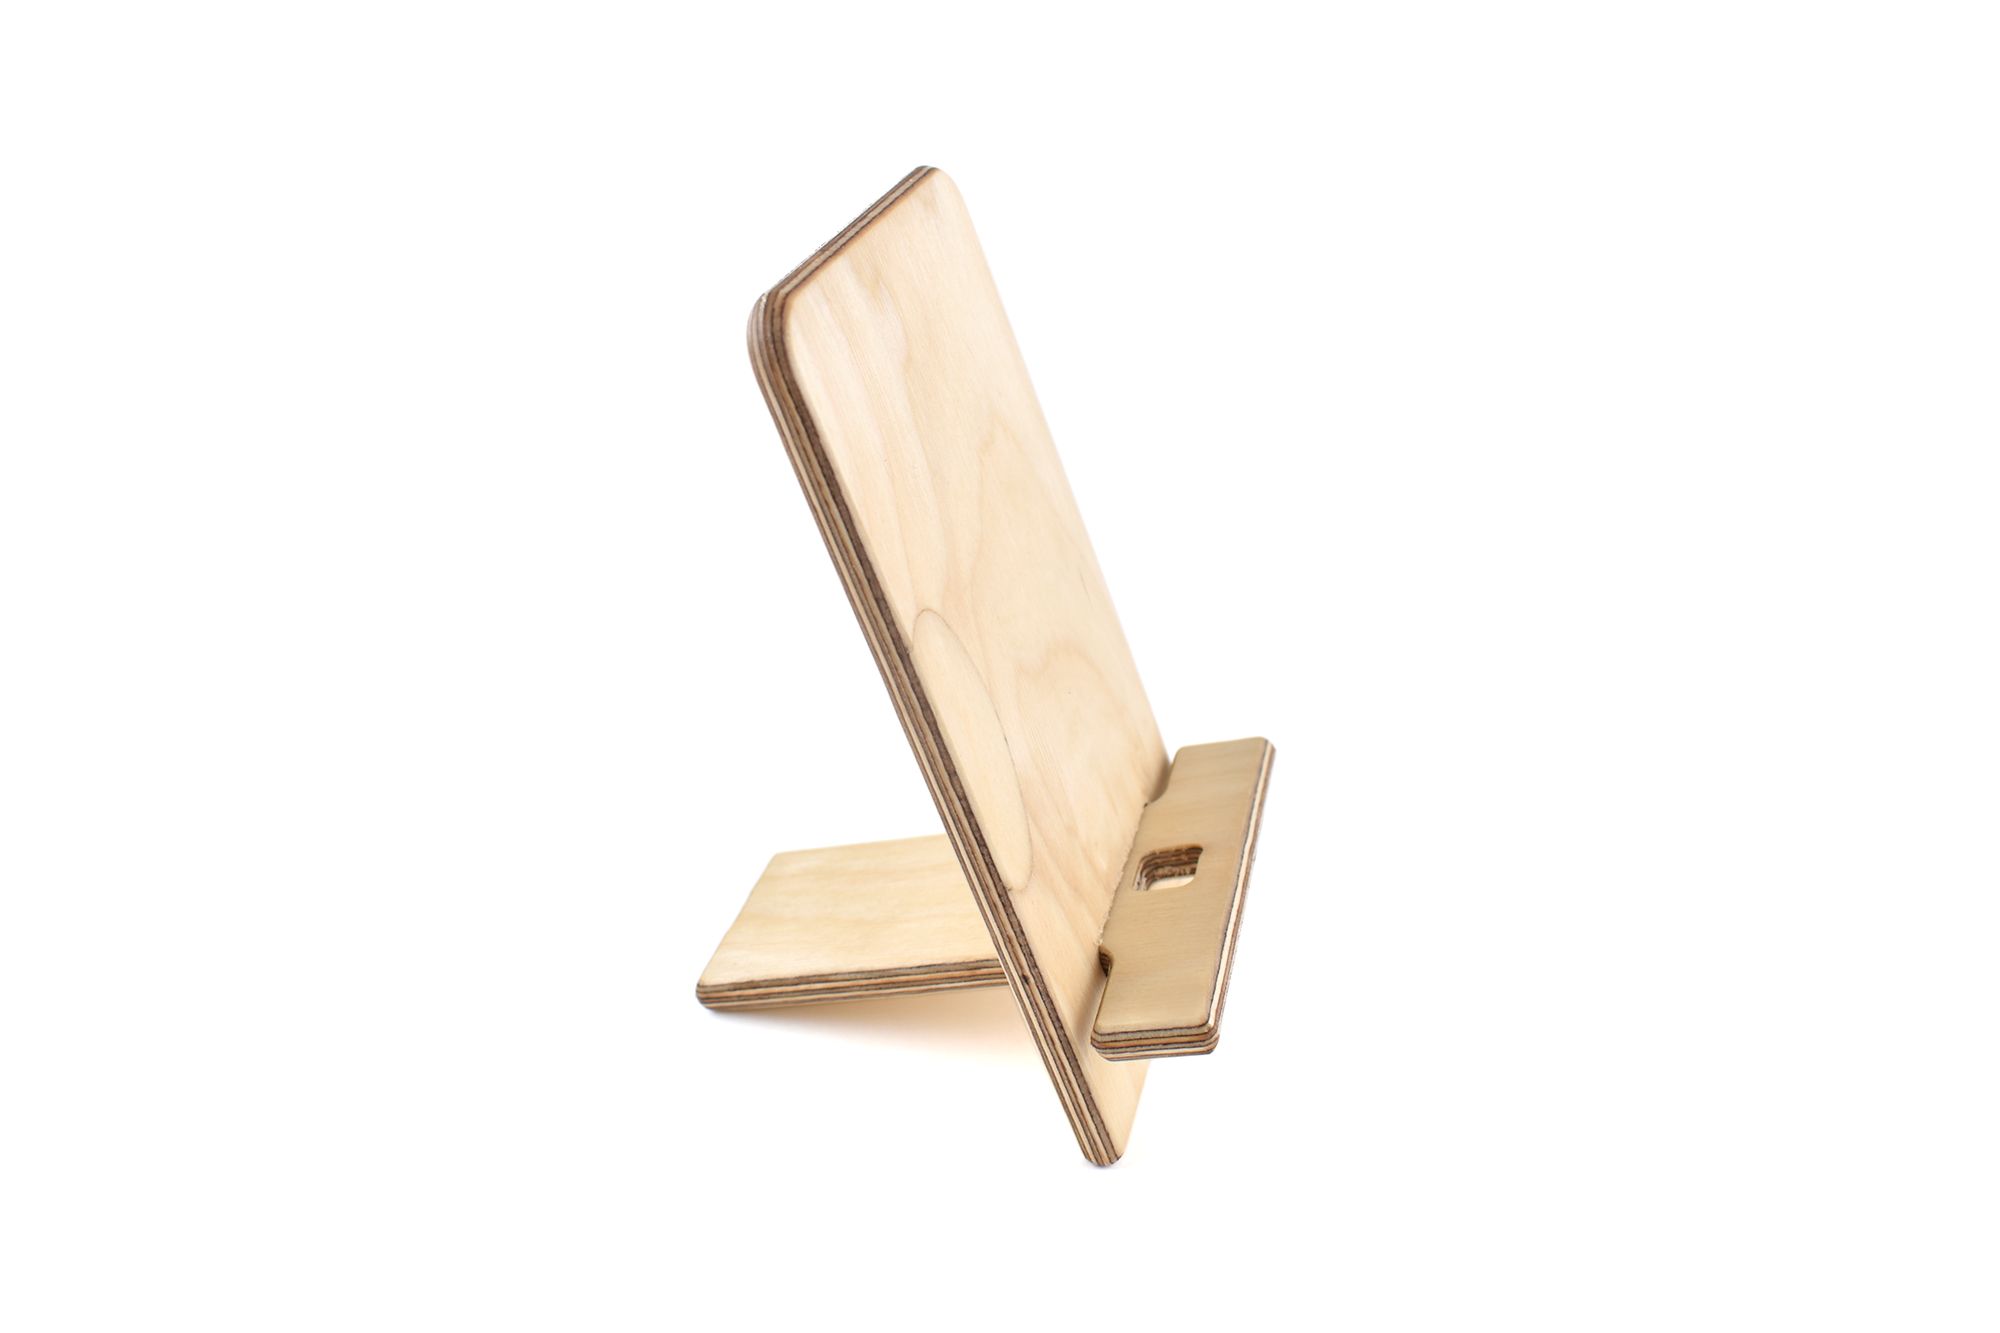 Russian Birch Mobile phone stand